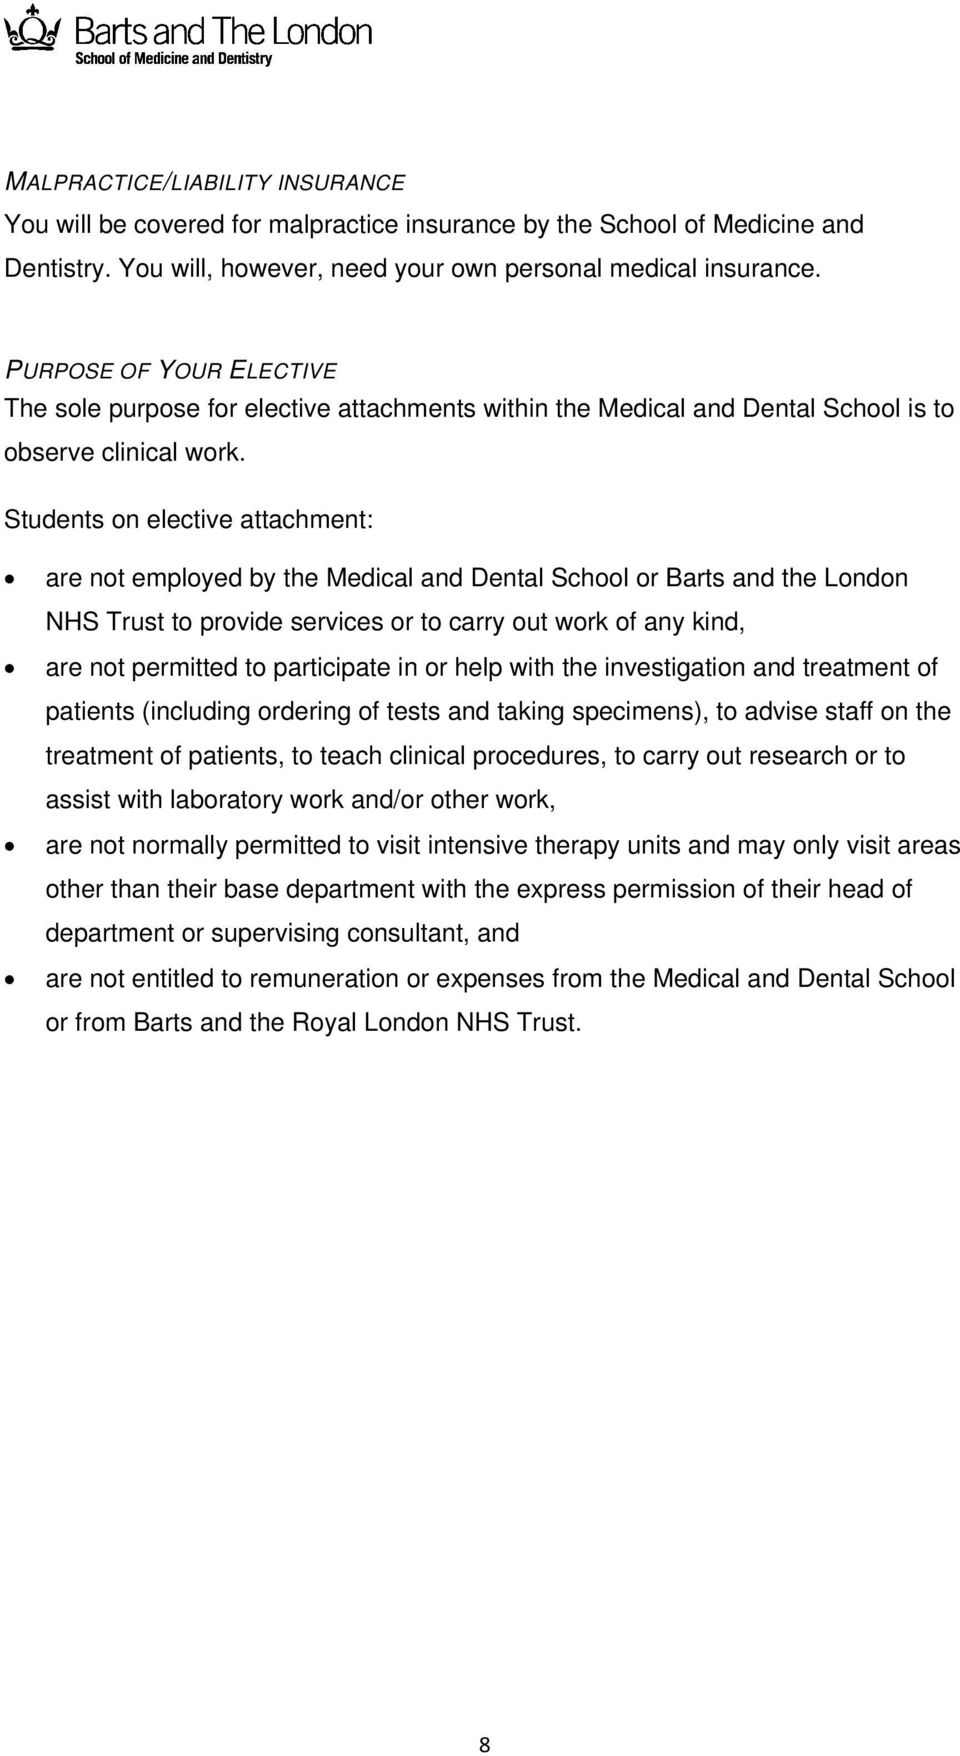 Students on elective attachment: are not employed by the Medical and Dental School or Barts and the London NHS Trust to provide services or to carry out work of any kind, are not permitted to